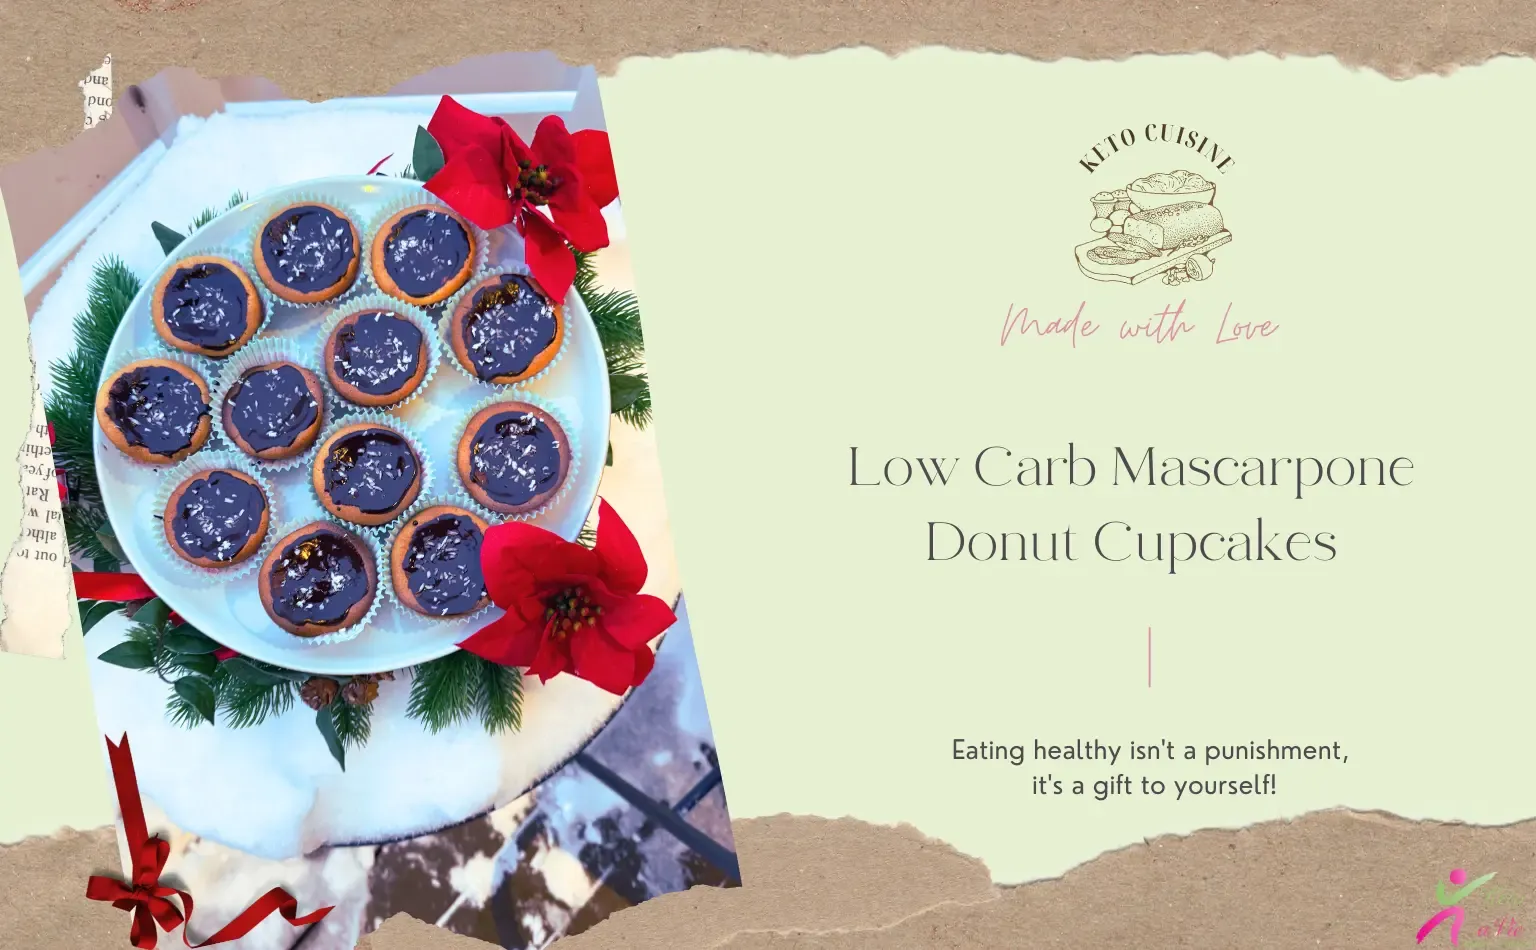 Delicious Low Carb Mascarpone Donut Cupcake - A keto-friendly delight embodying the flavors of donuts in a guilt-free, health-conscious treat.